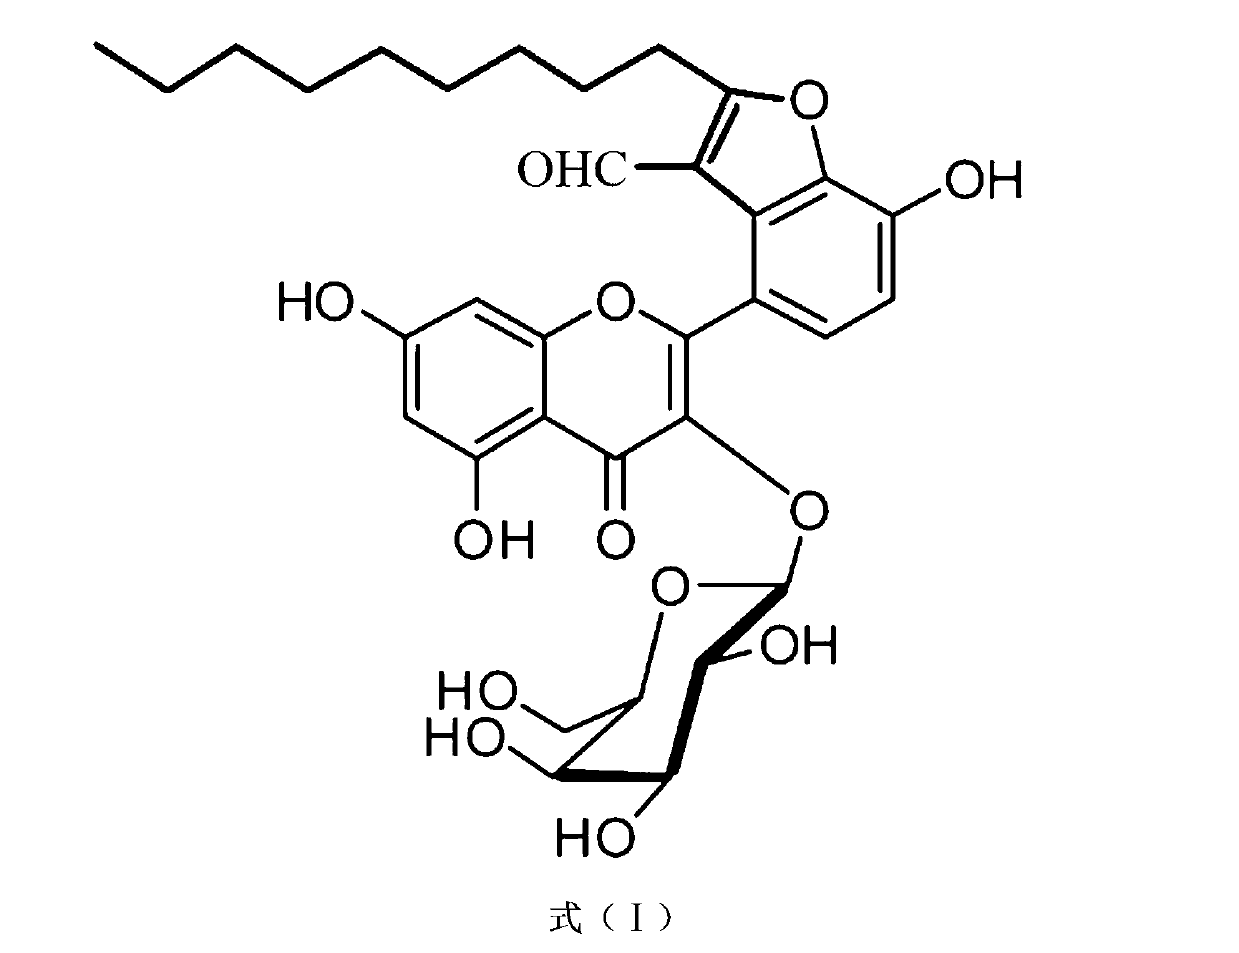 Application of Houttuynoid A for preparing monoamine oxidase (MAO) inhibitor medicine